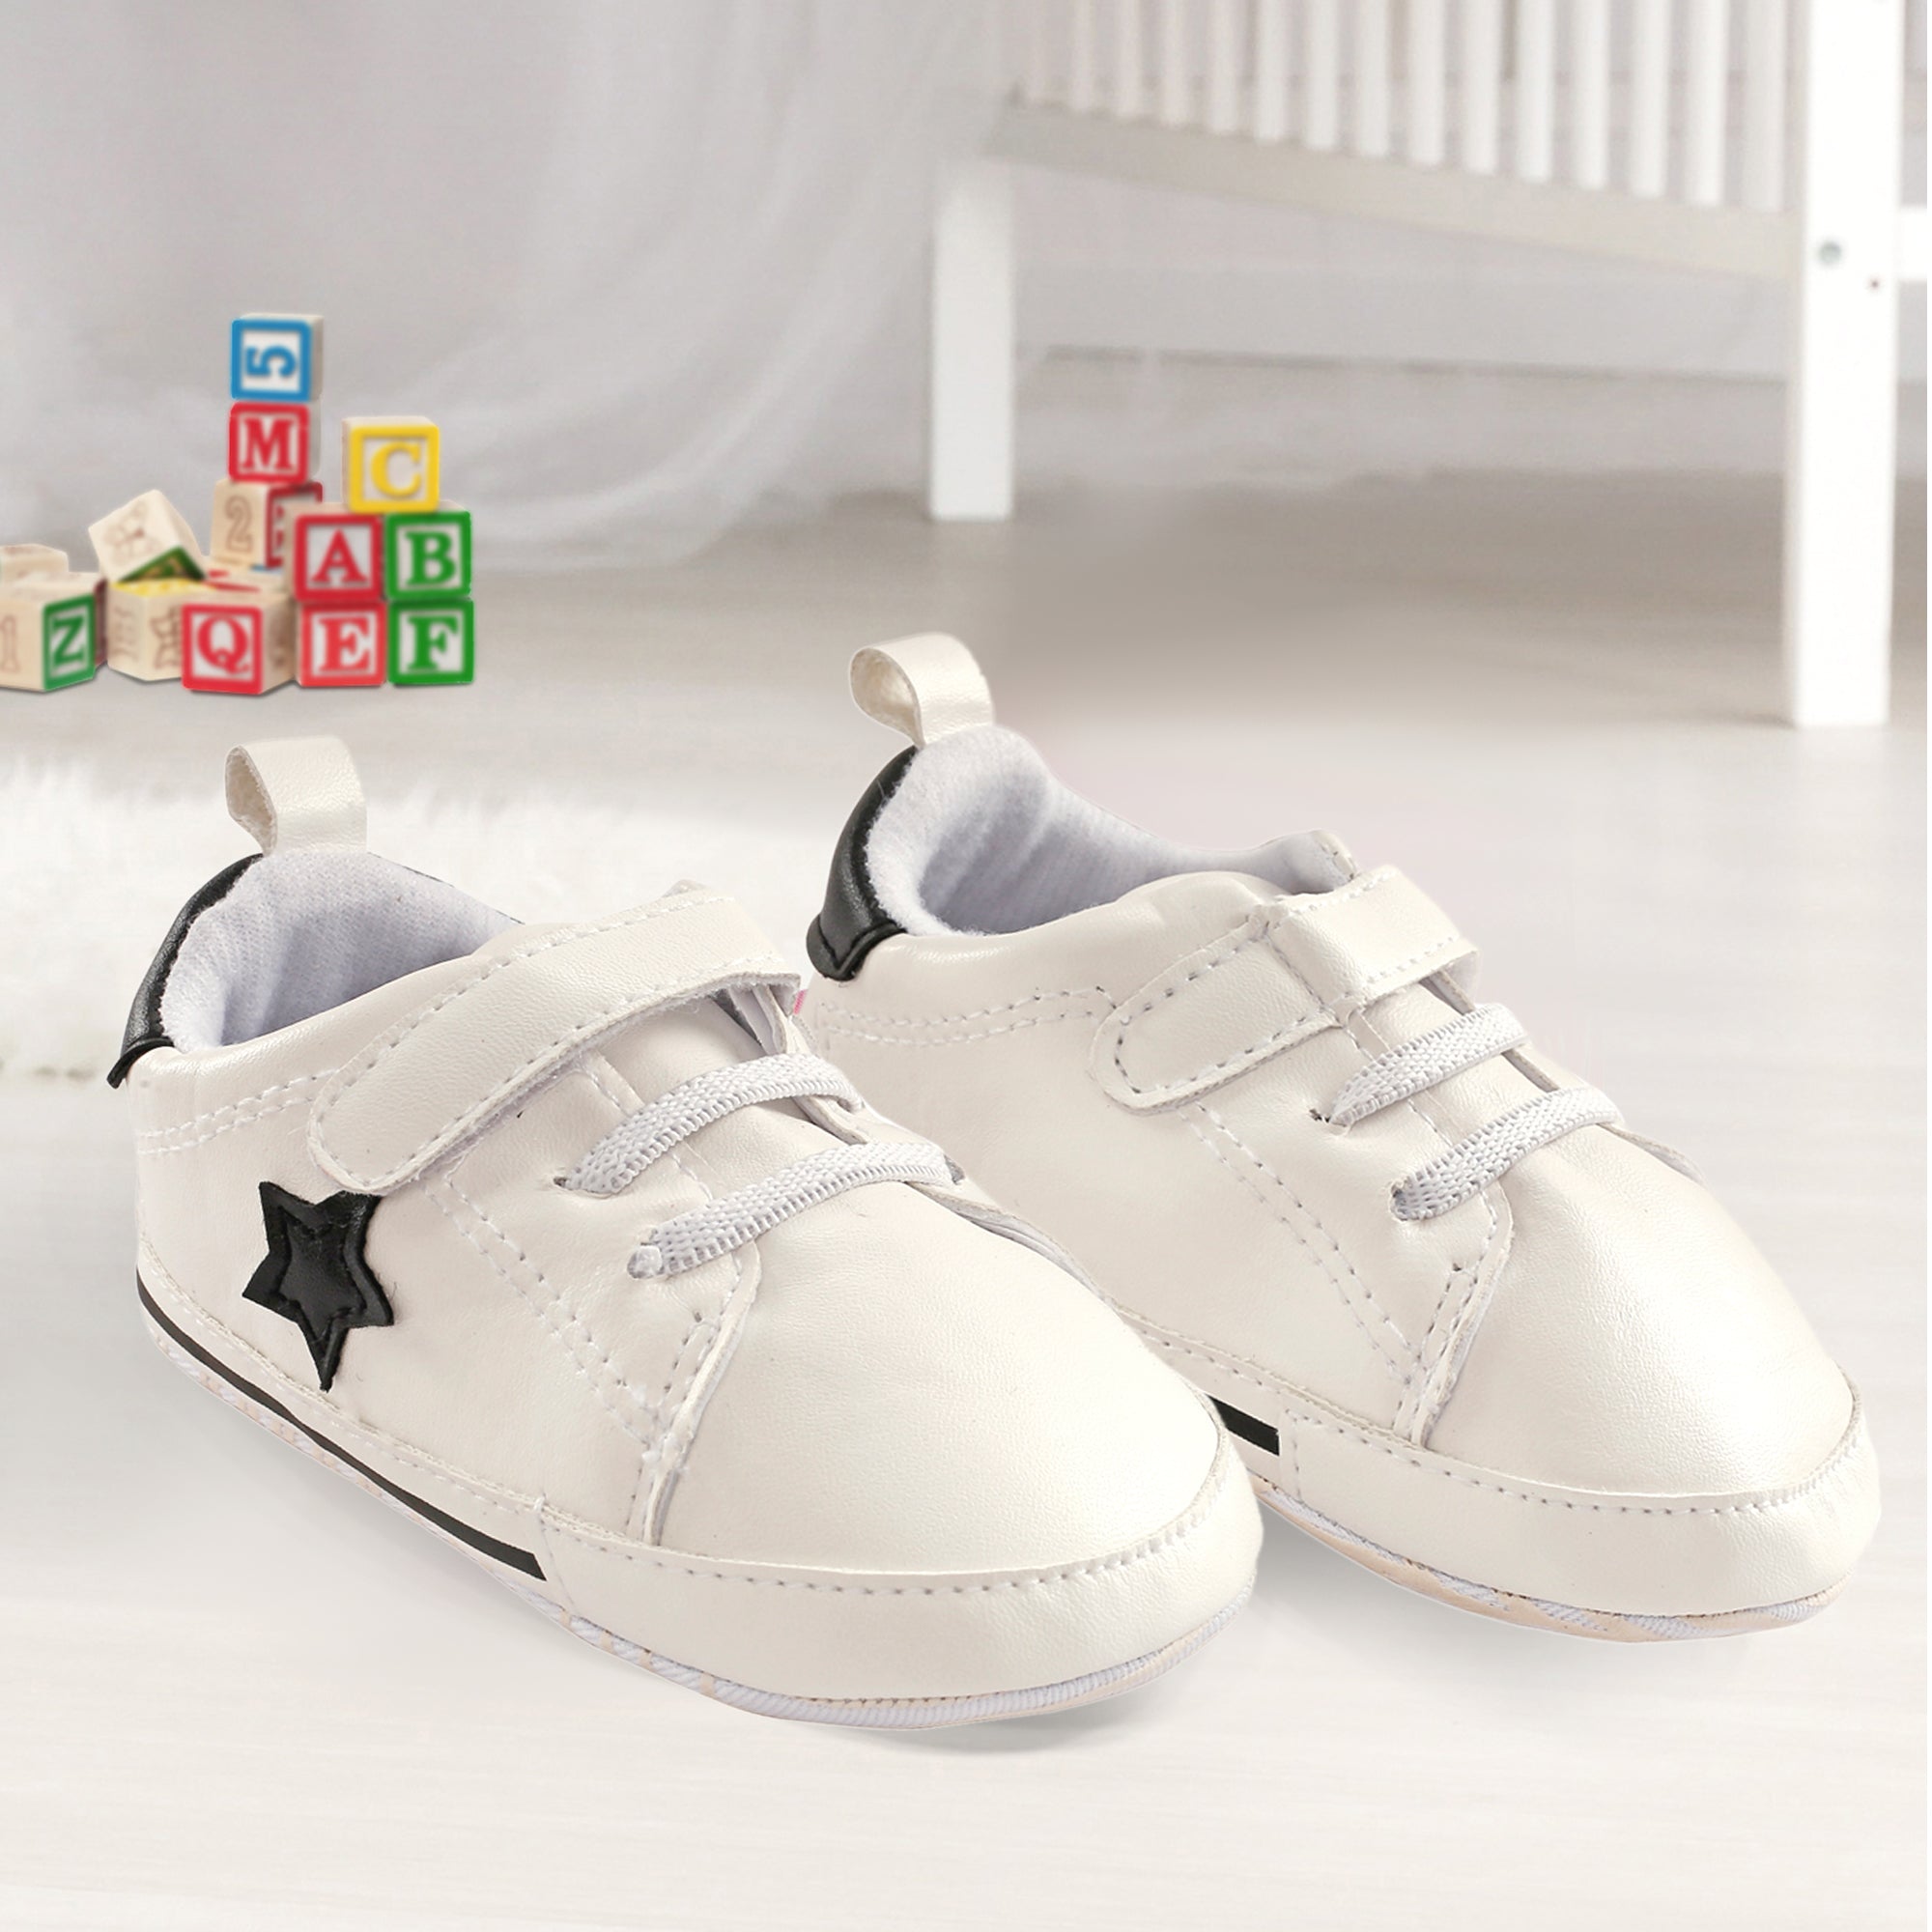 My Star White And Black Casual Booties - Baby Moo